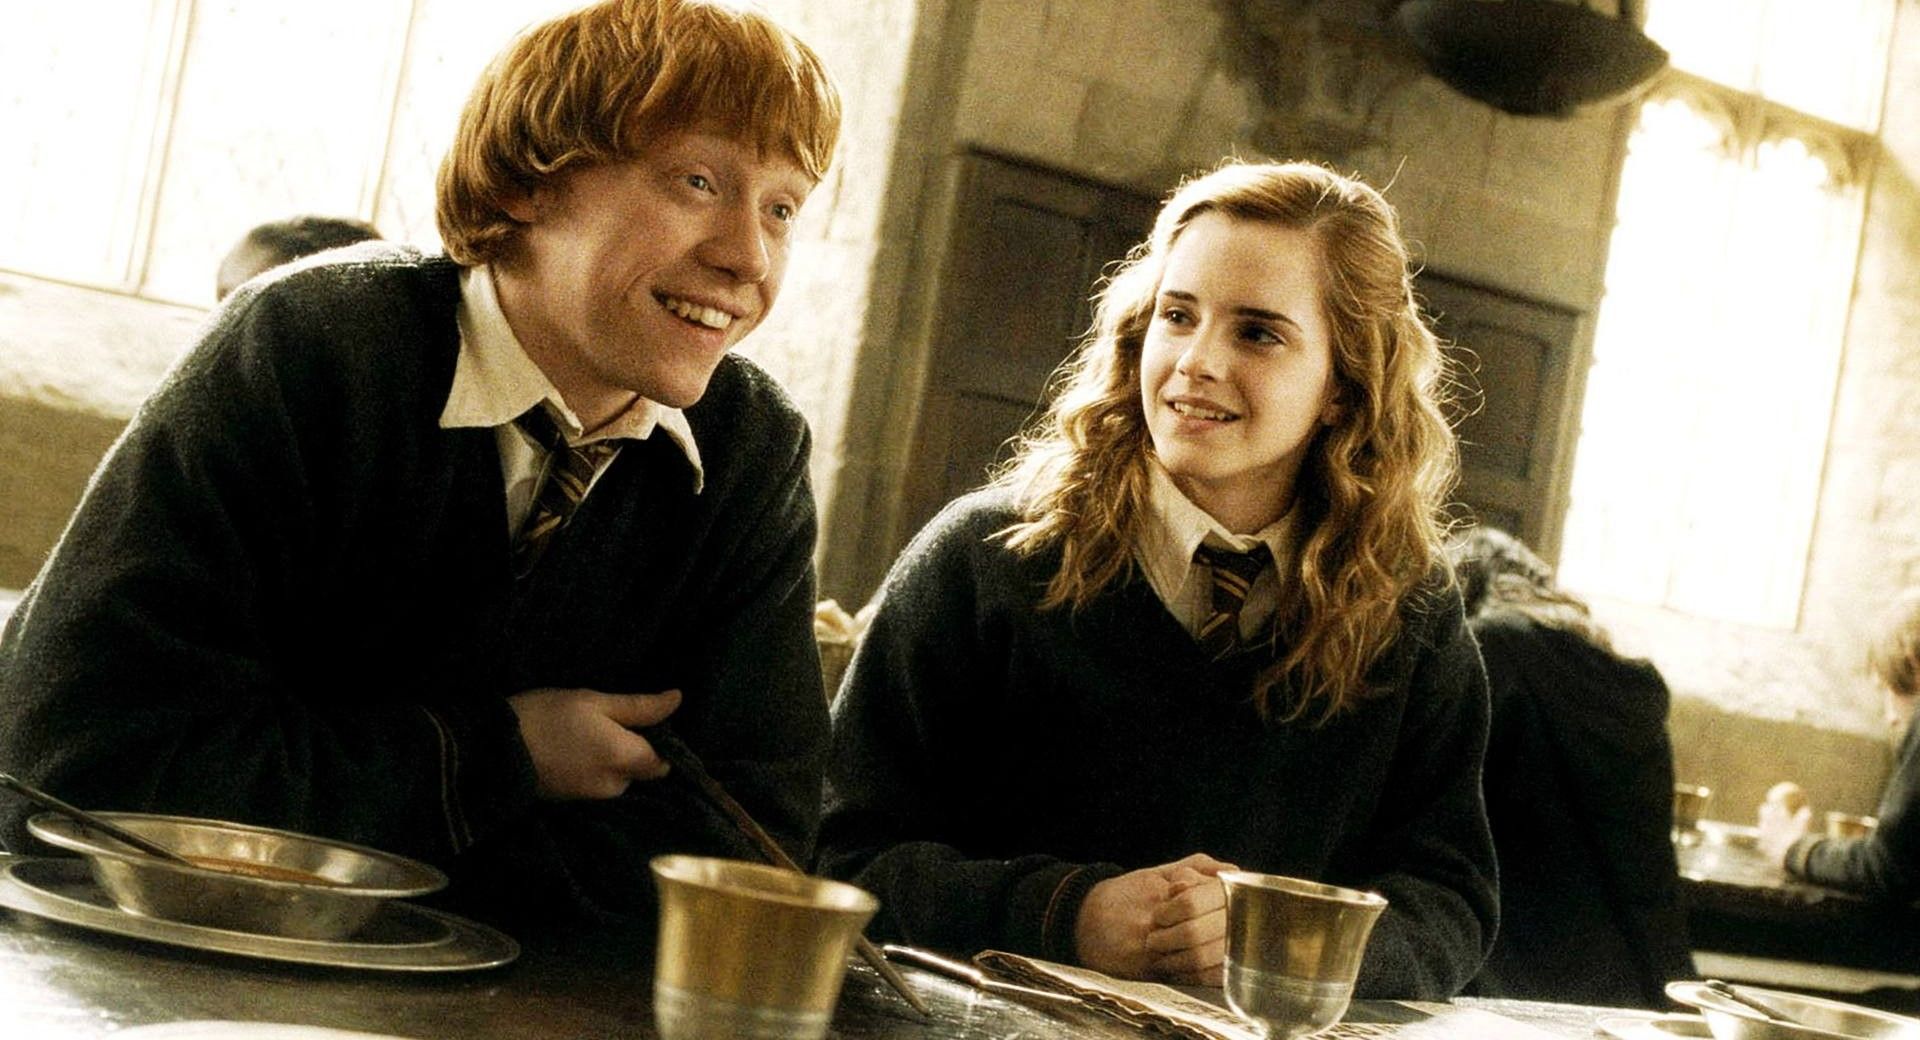 Hermione and Ron together at the table in Harry Potter